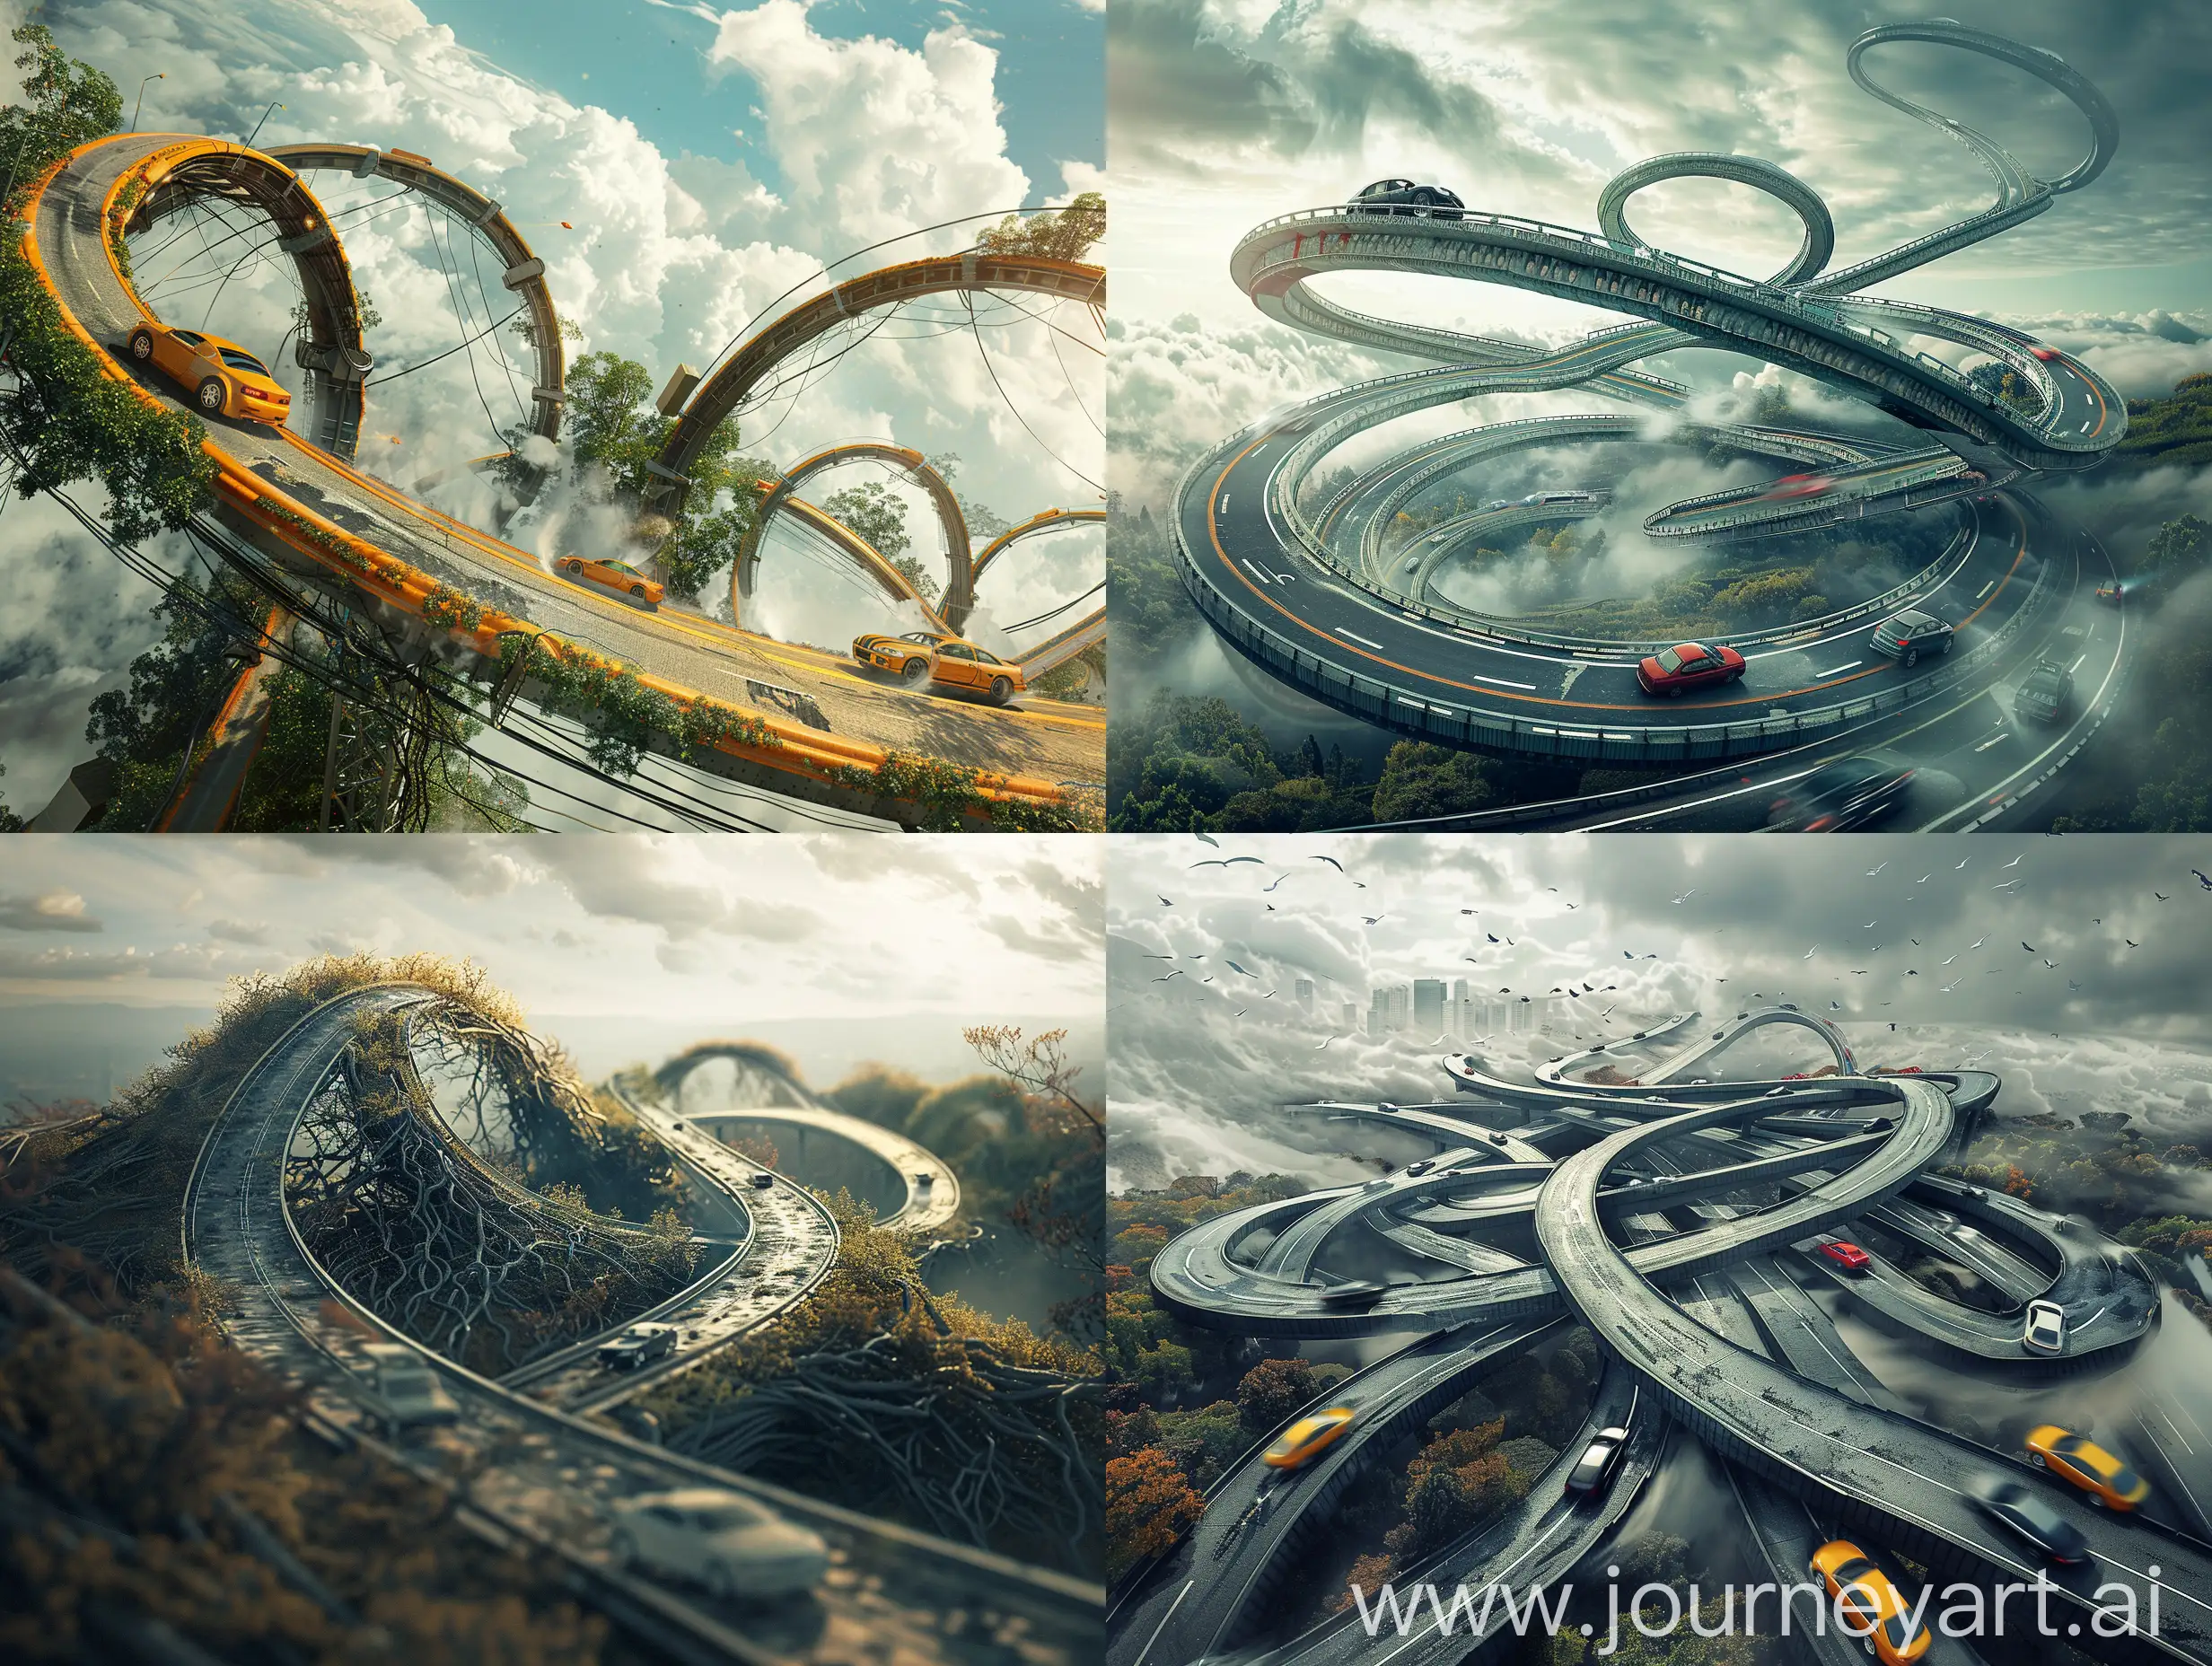 Surreal-3D-Highway-with-Roller-CoasterLike-Roads-and-Driving-Cars